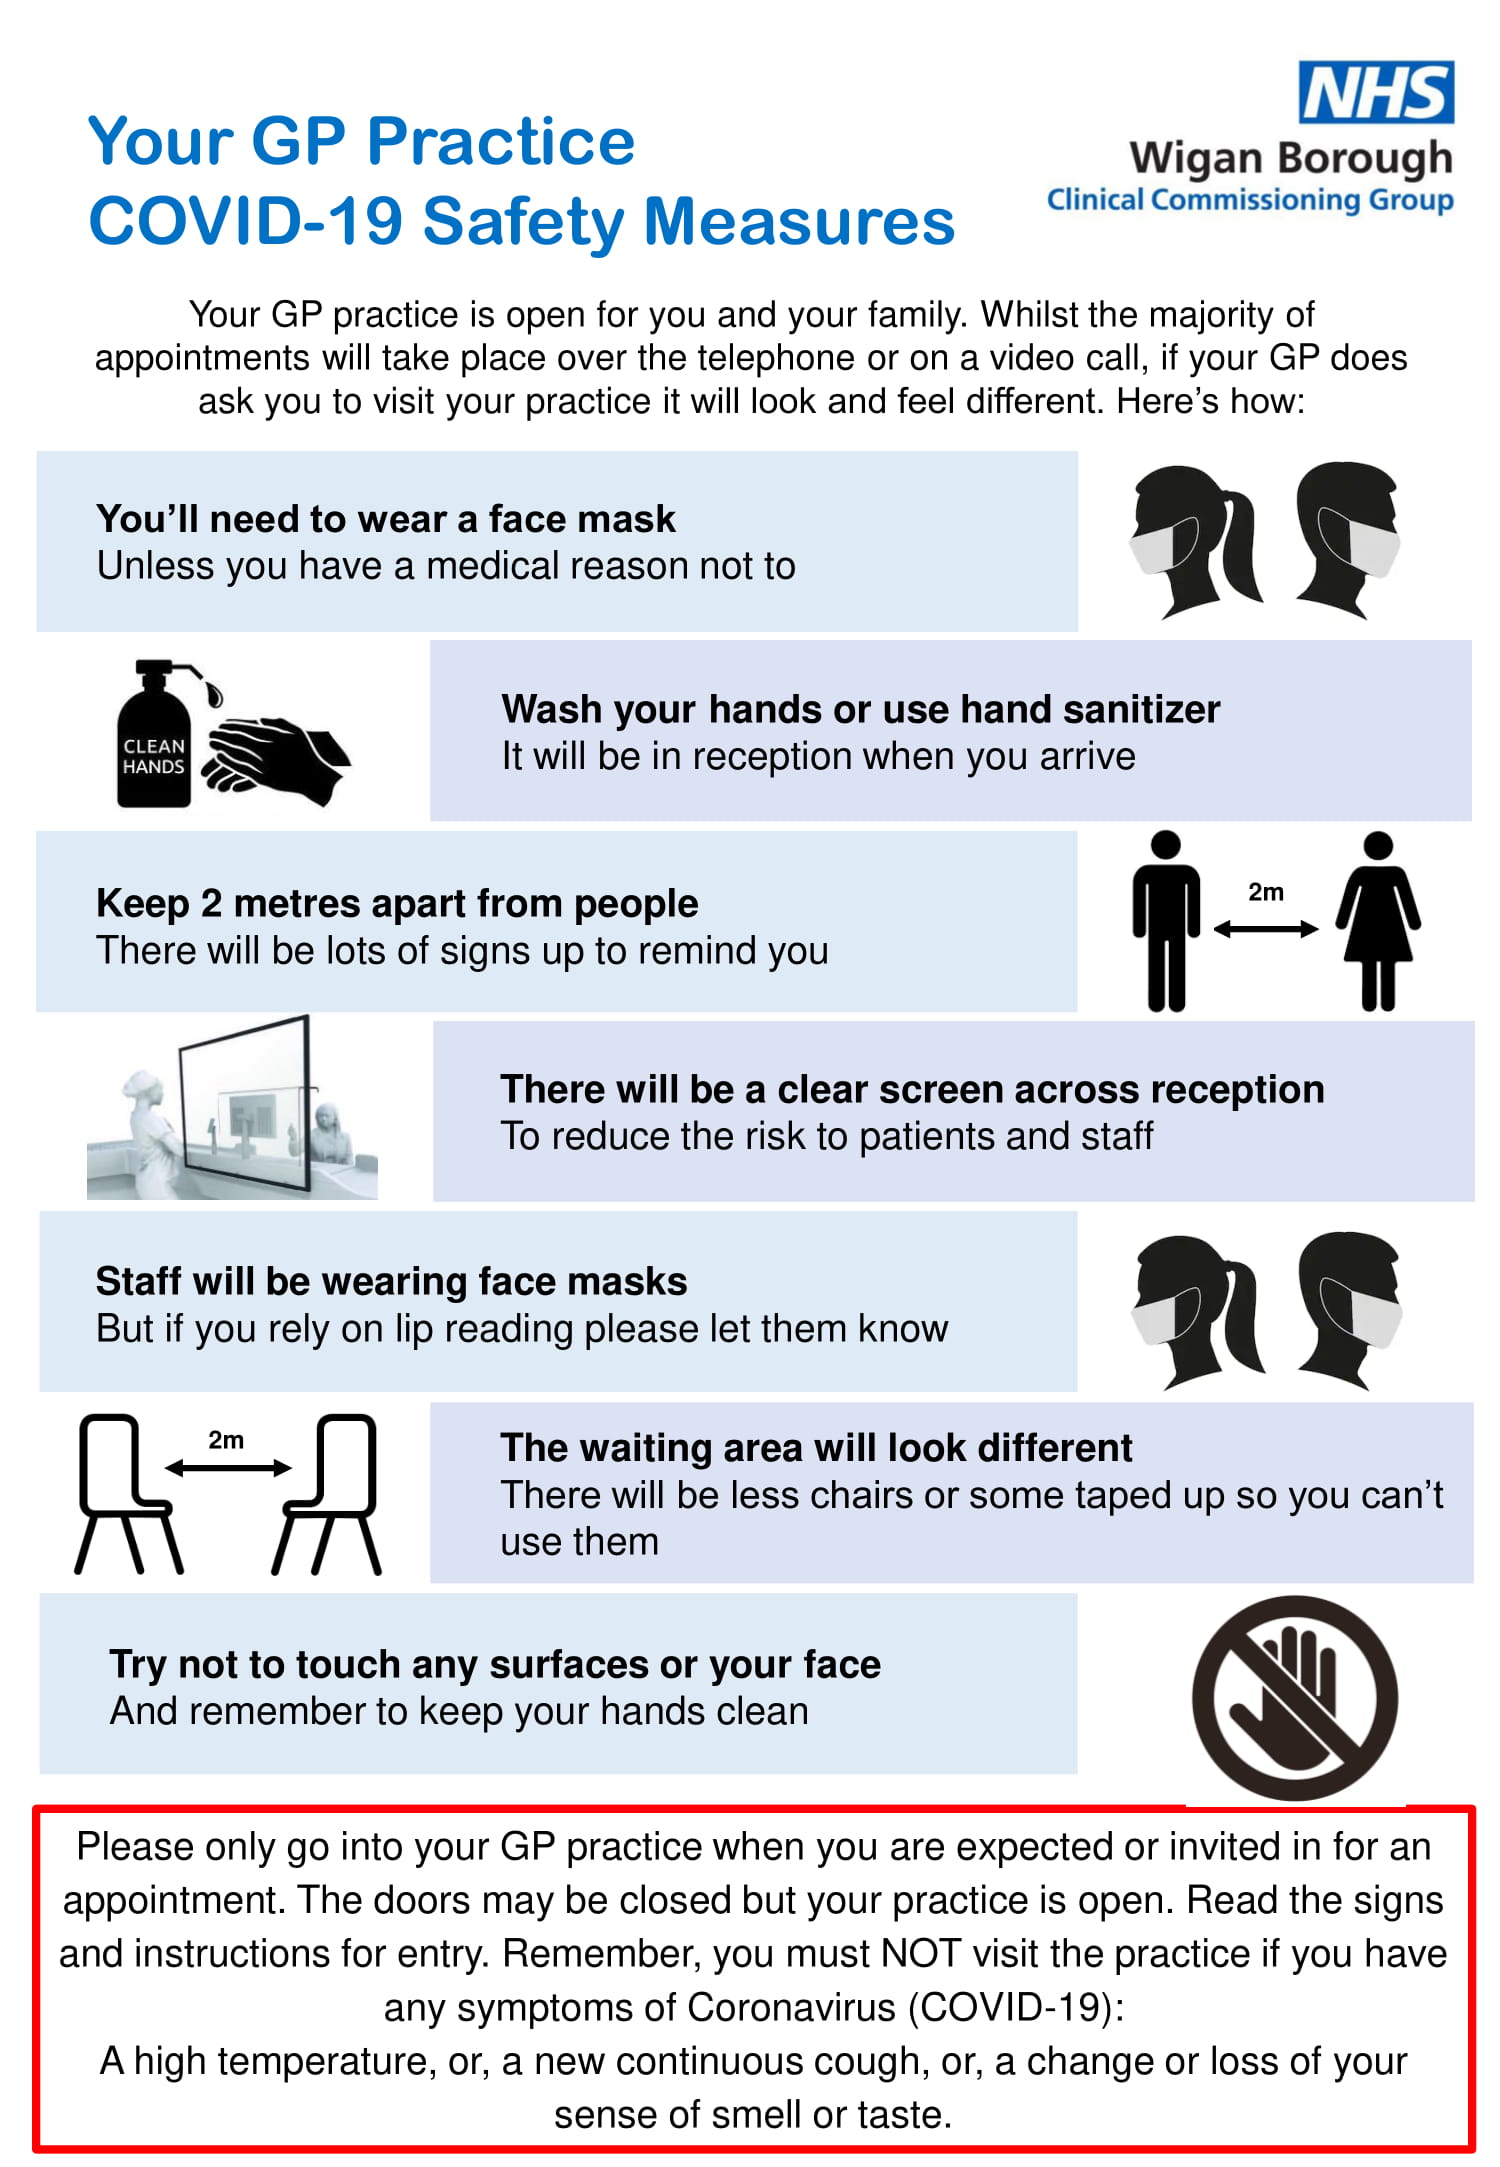 Your GP Practice COVID-19 Safety Measures Poster